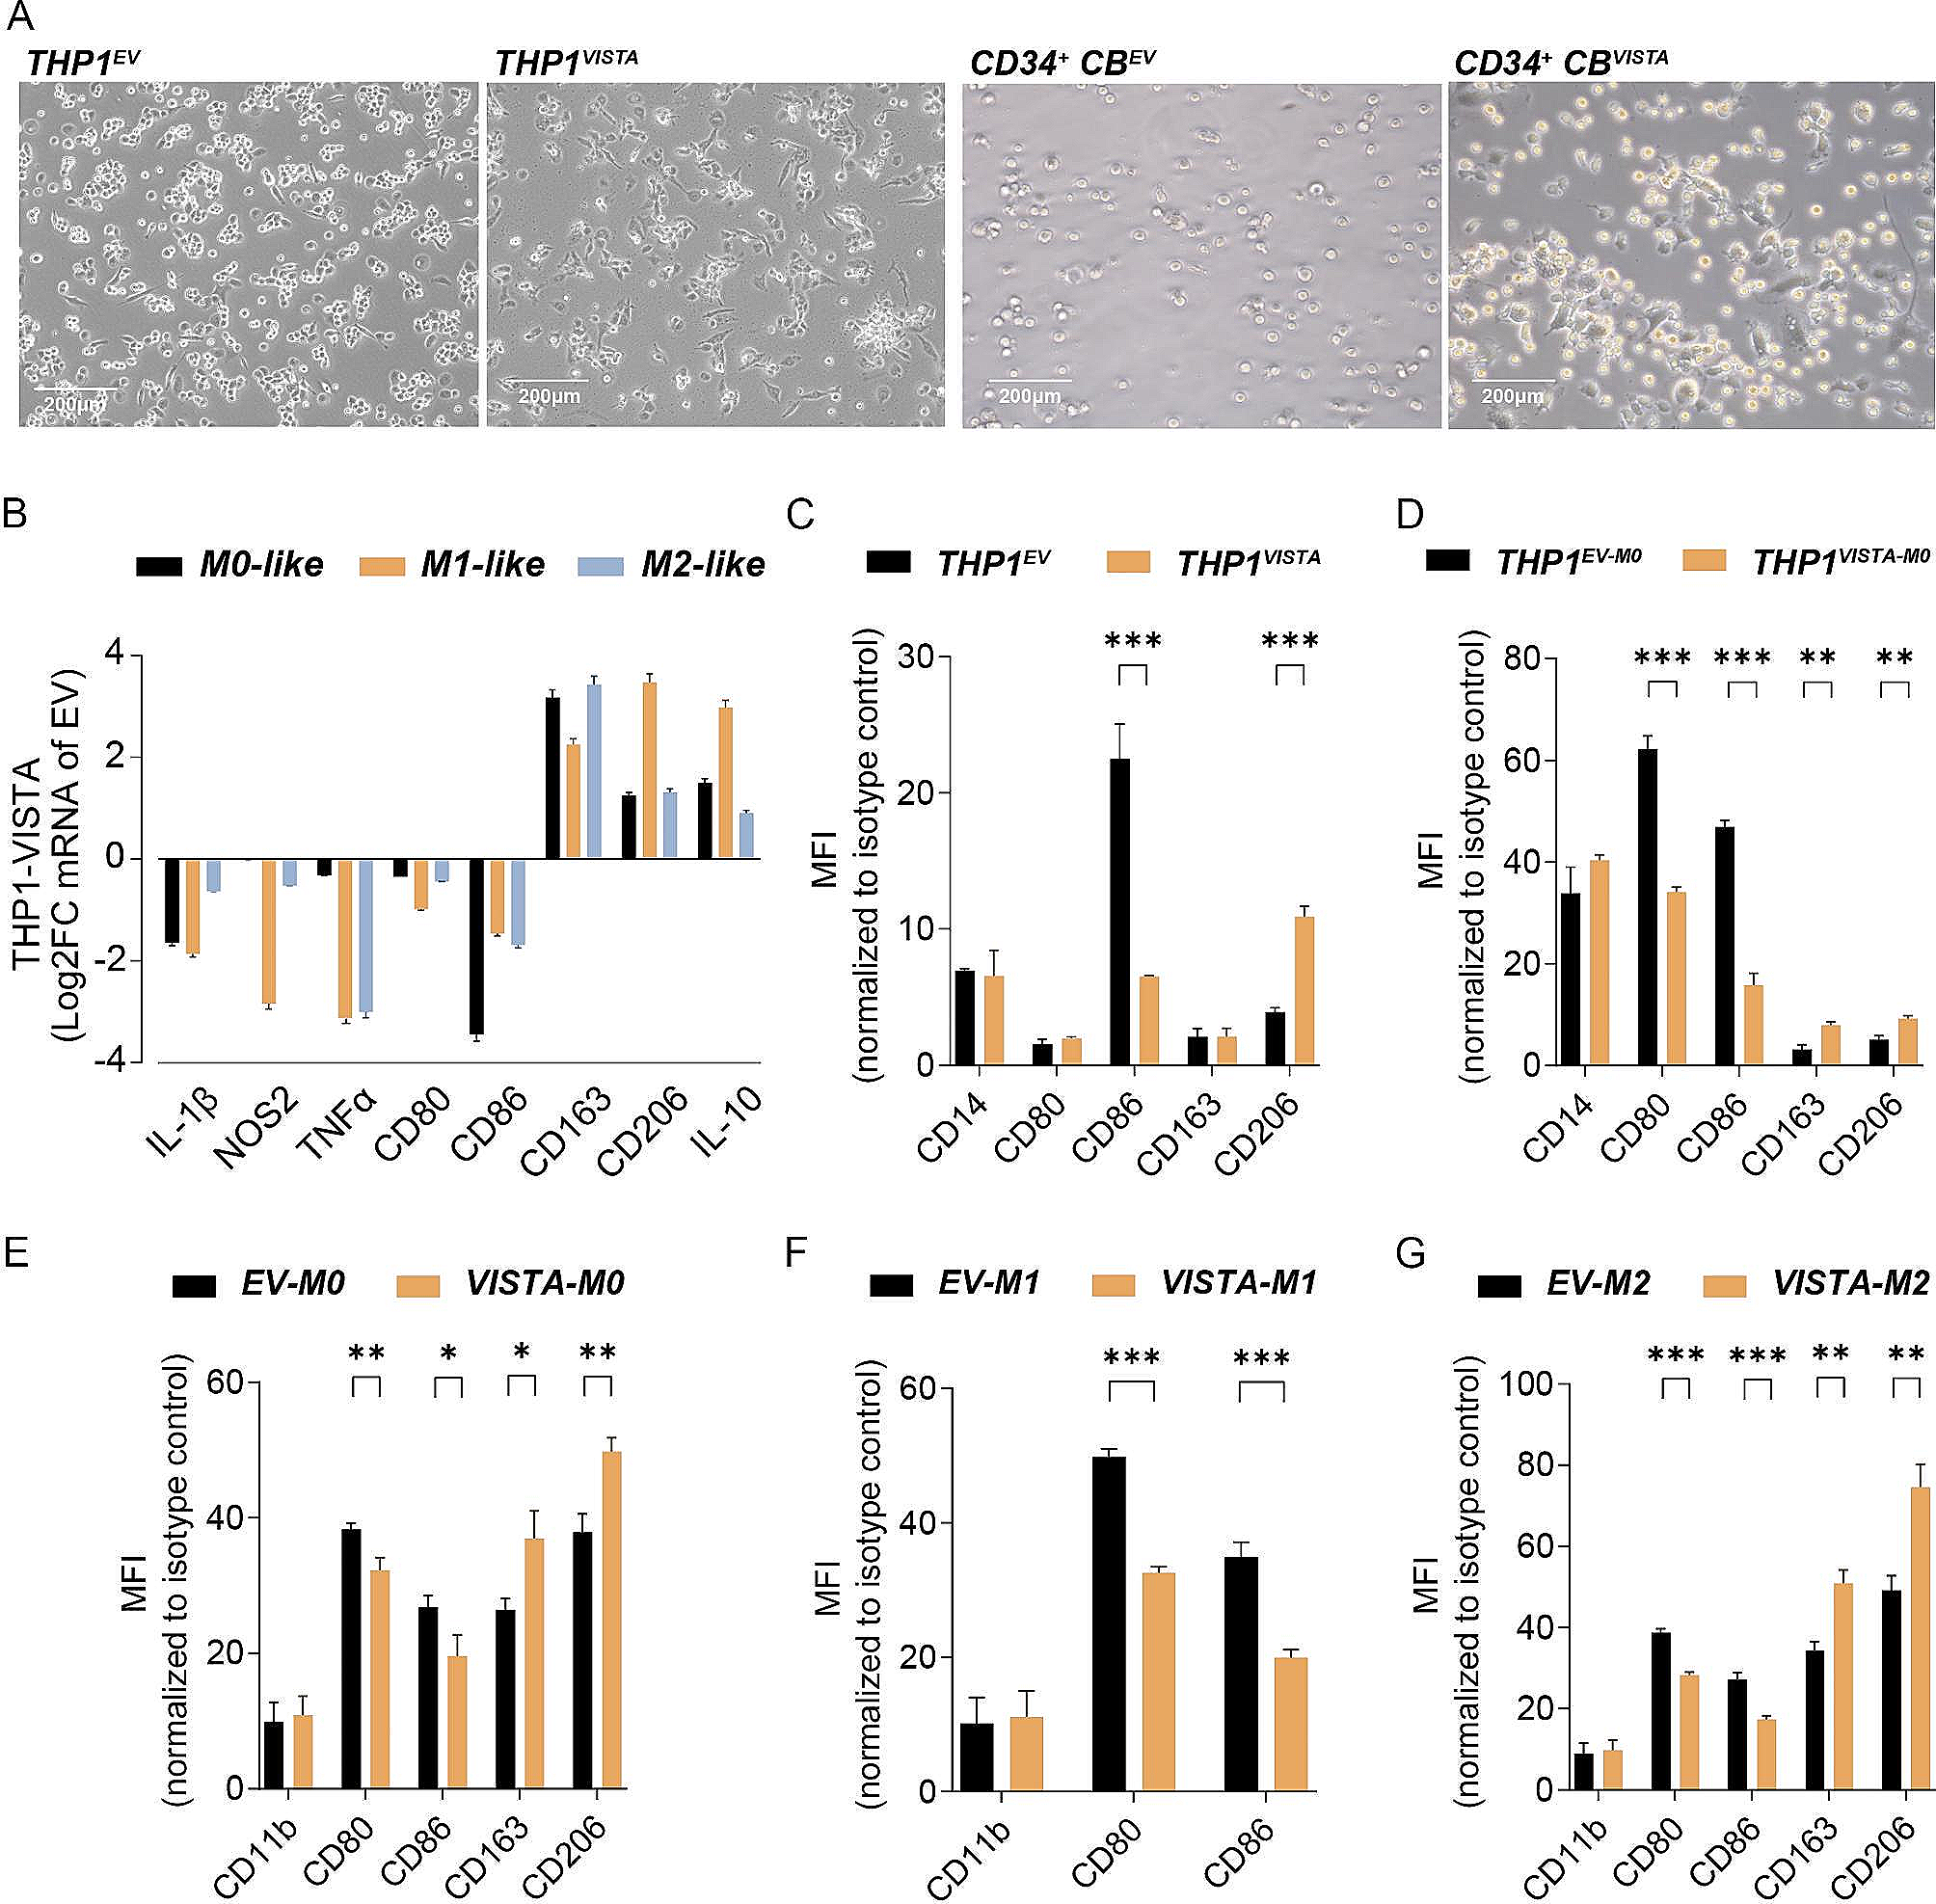 VISTA drives macrophages towards a pro-tumoral phenotype that promotes cancer cell phagocytosis yet down-regulates T cell responses